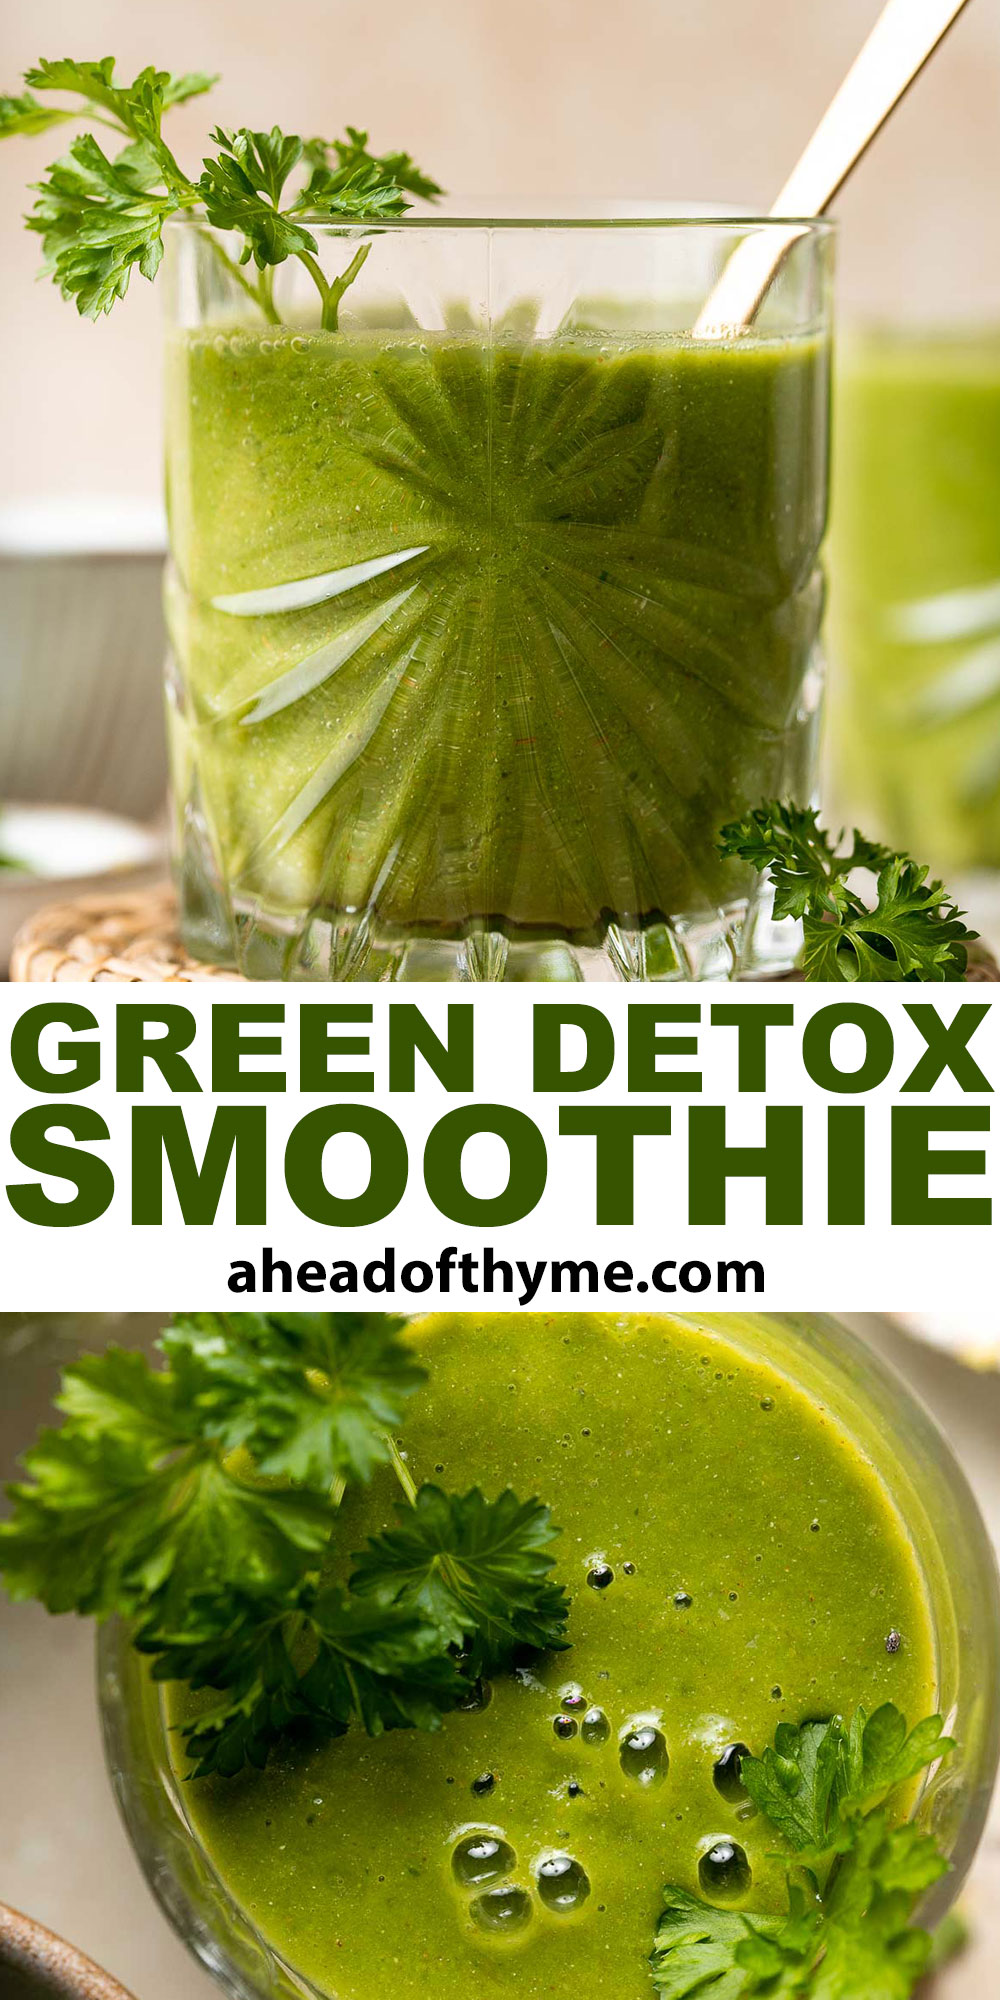 Green Detox Smoothie is quick and easy to make, delicious and nutritious, and loaded with antioxidants, nutrients, and vitamins for a quick energy boost. | aheadofthyme.com